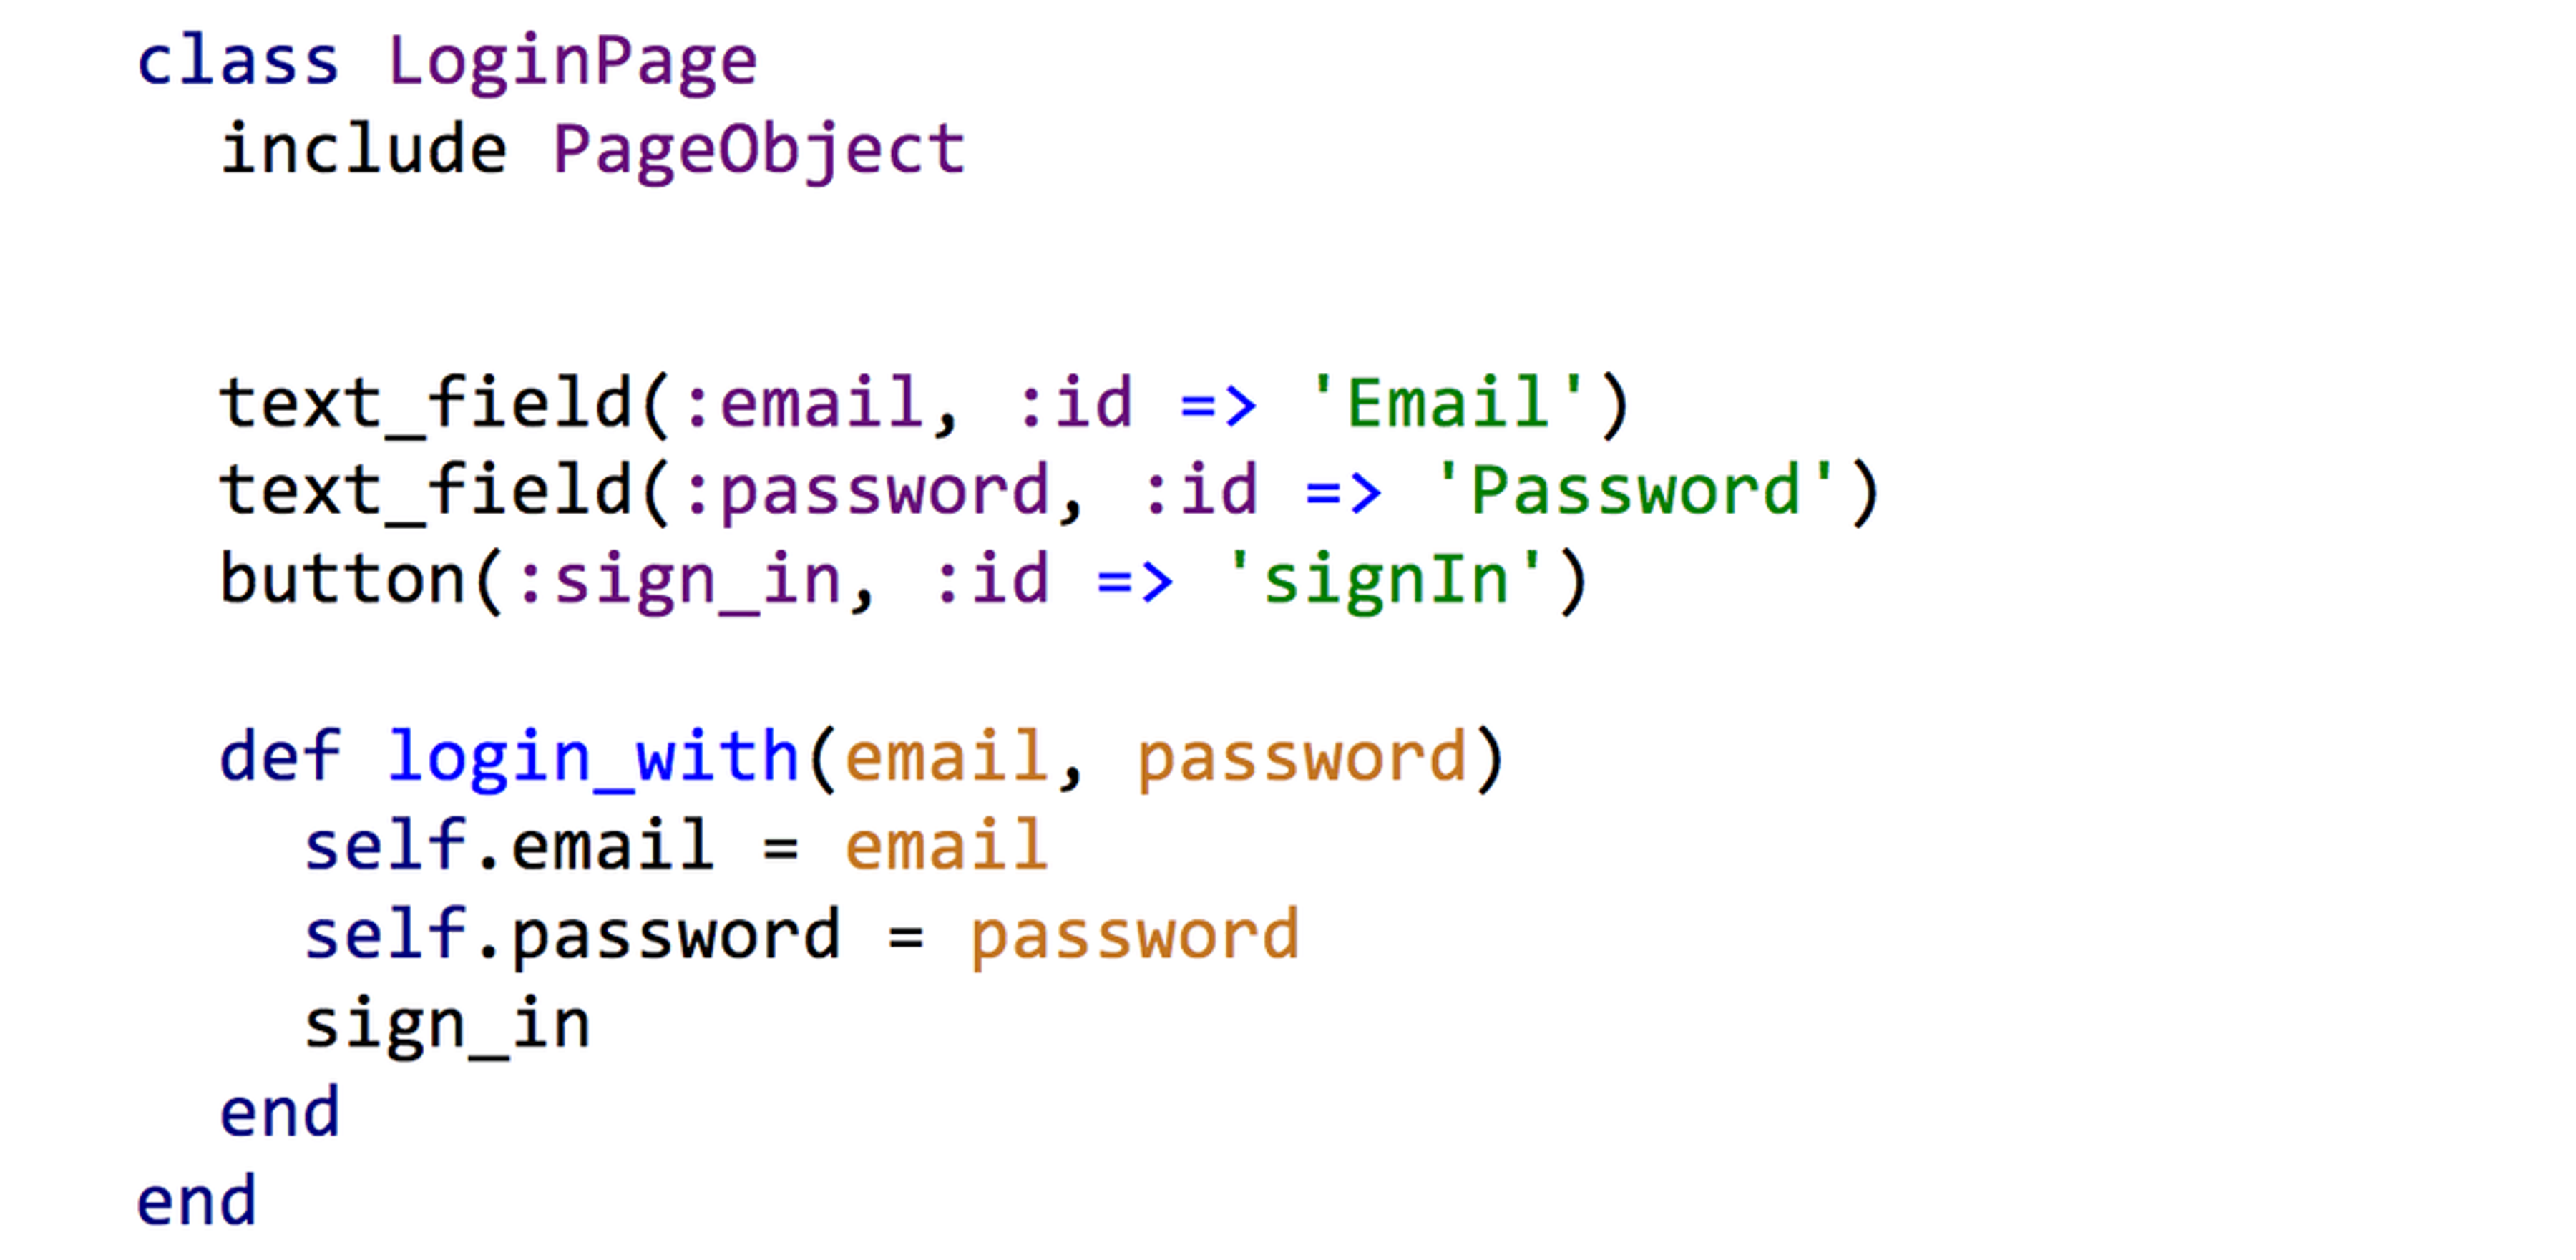 Image showing how to create a Login page using an Page Object gem.